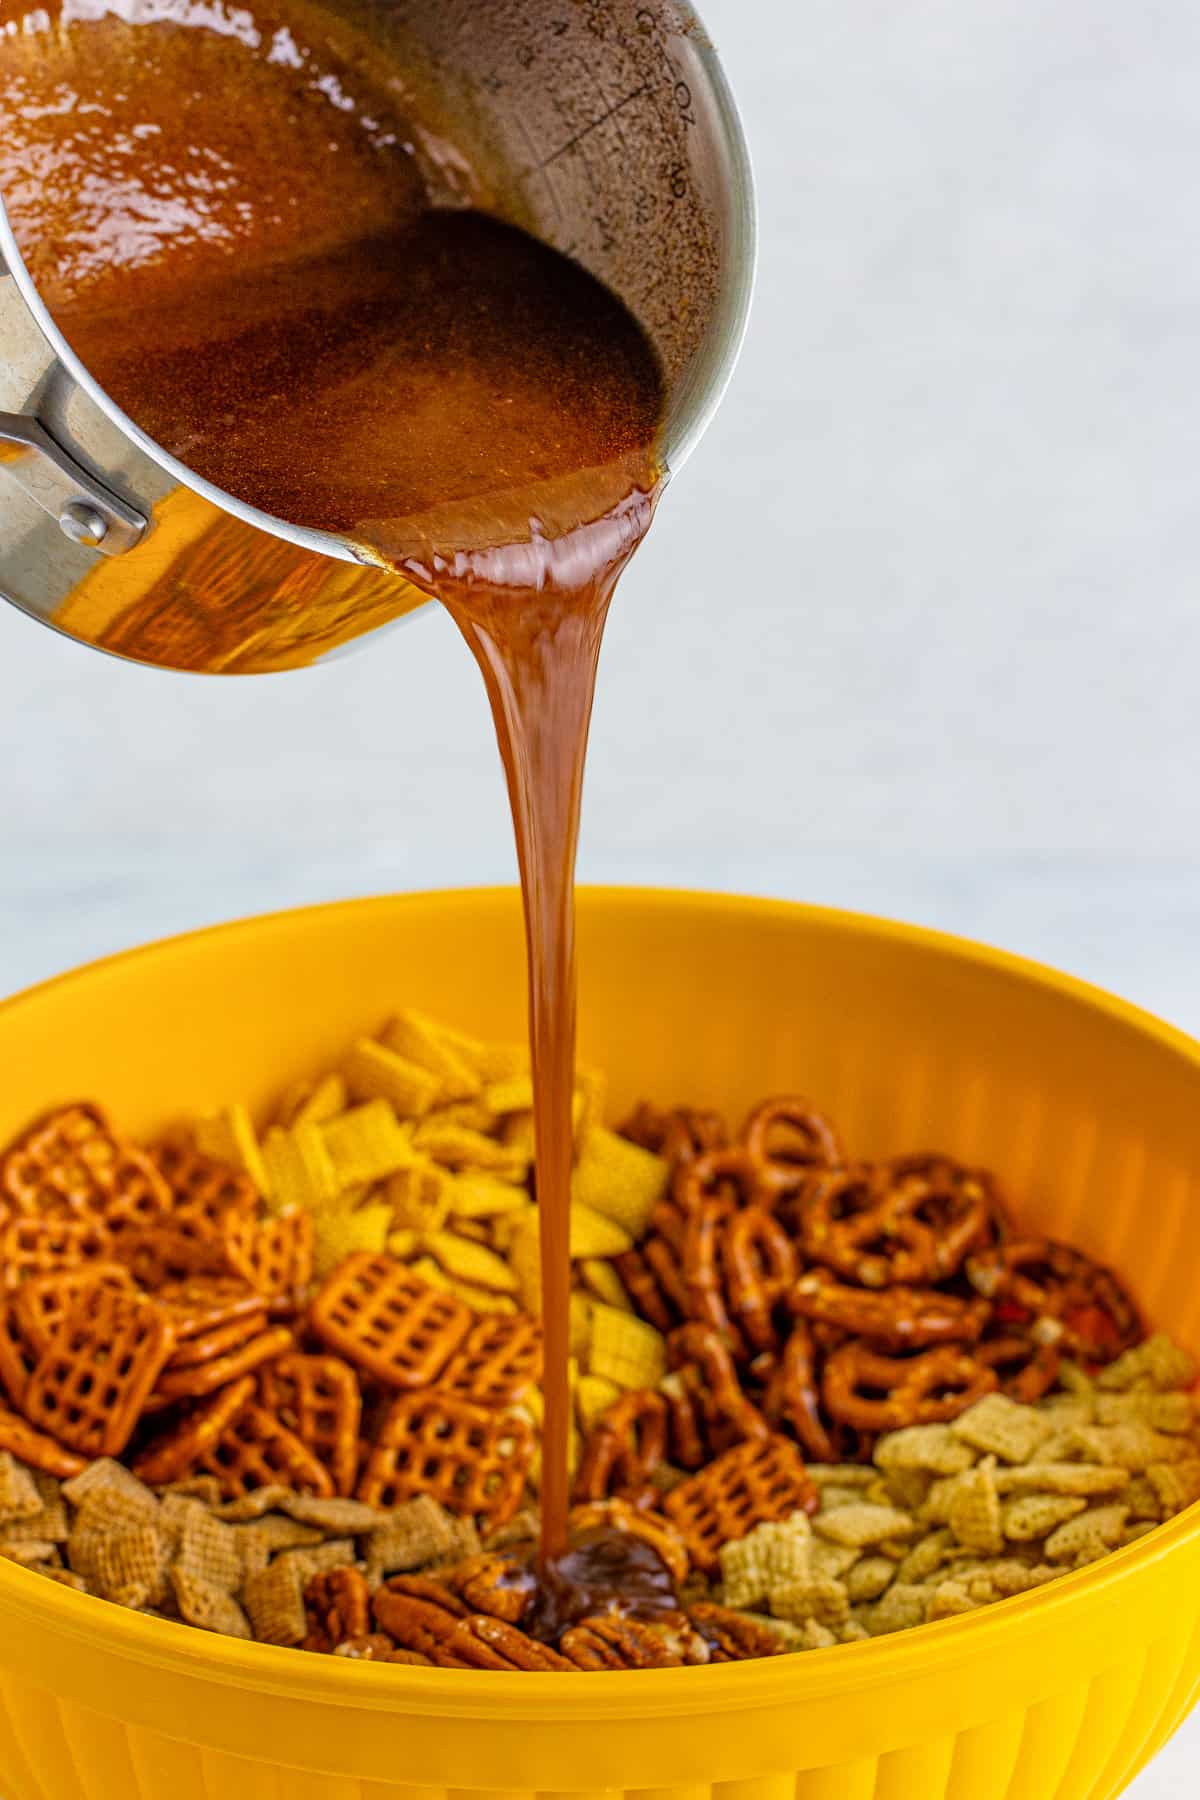 Cinnamon sugar and butter mixture being poured over chex mix.